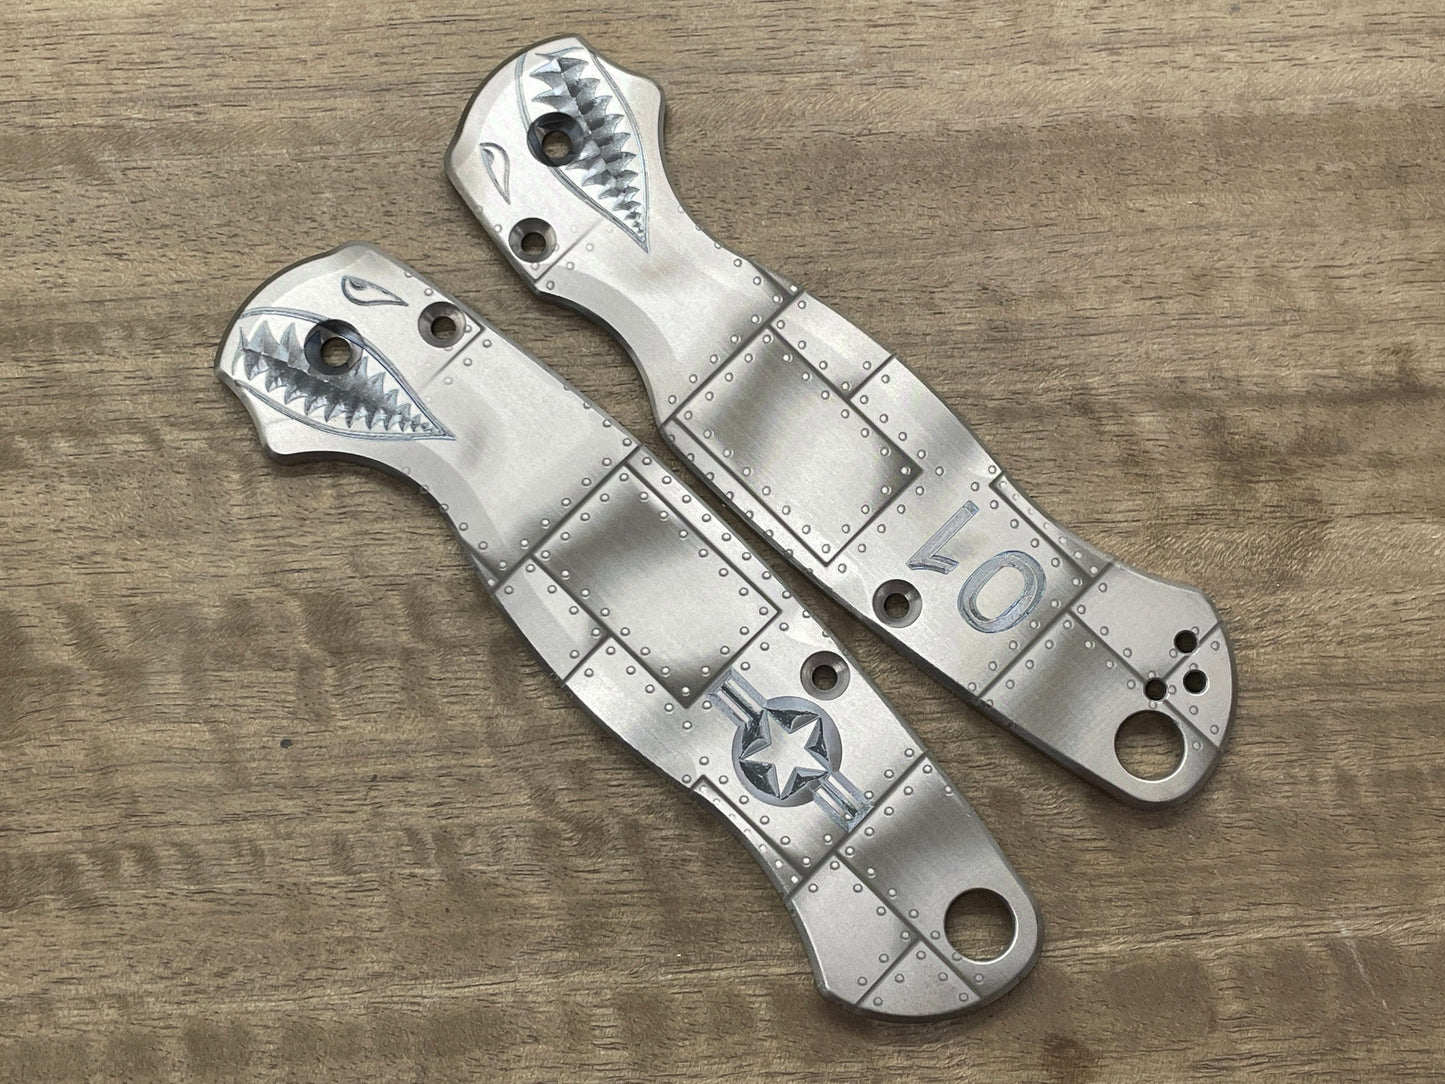 P40 RIVETED AIRPLANE Titanium scales for Spyderco Paramilitary 2 PM2